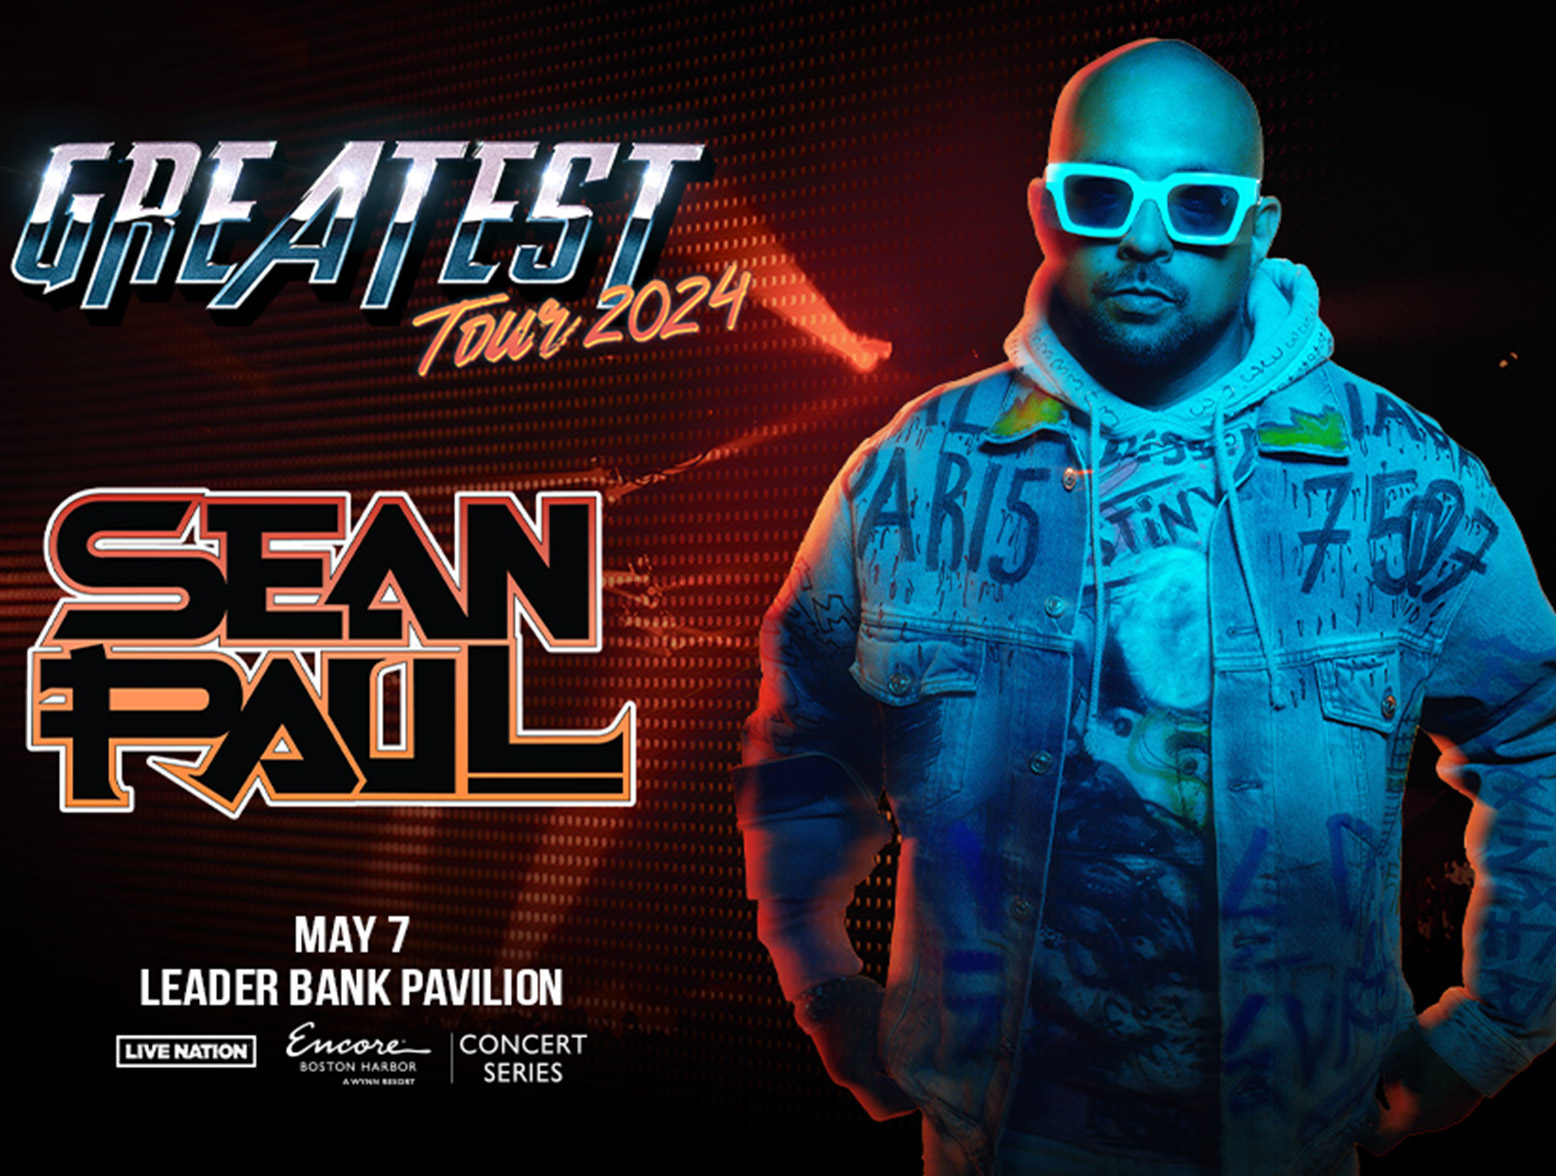 Sean Paul Greatest Tour 2024 Artwork. Sean Paul in jean jacket and sun glasses in blue light with a red/orange stage background